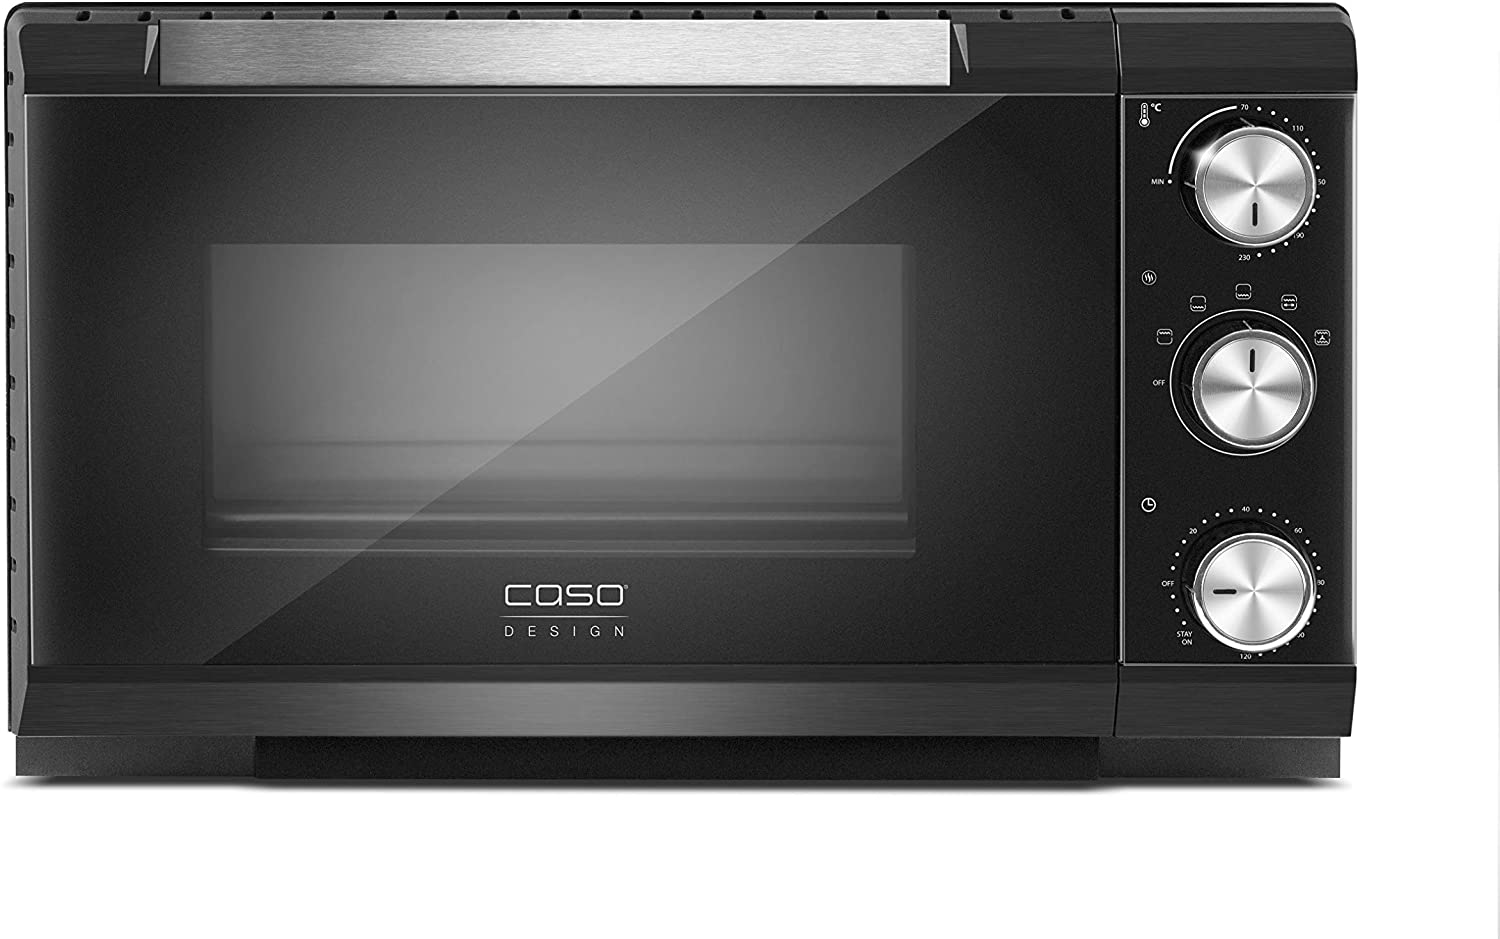 Caso to20 Design Oven Approx. 20 Litres Cooking Chamber, 5 Way Function: Re